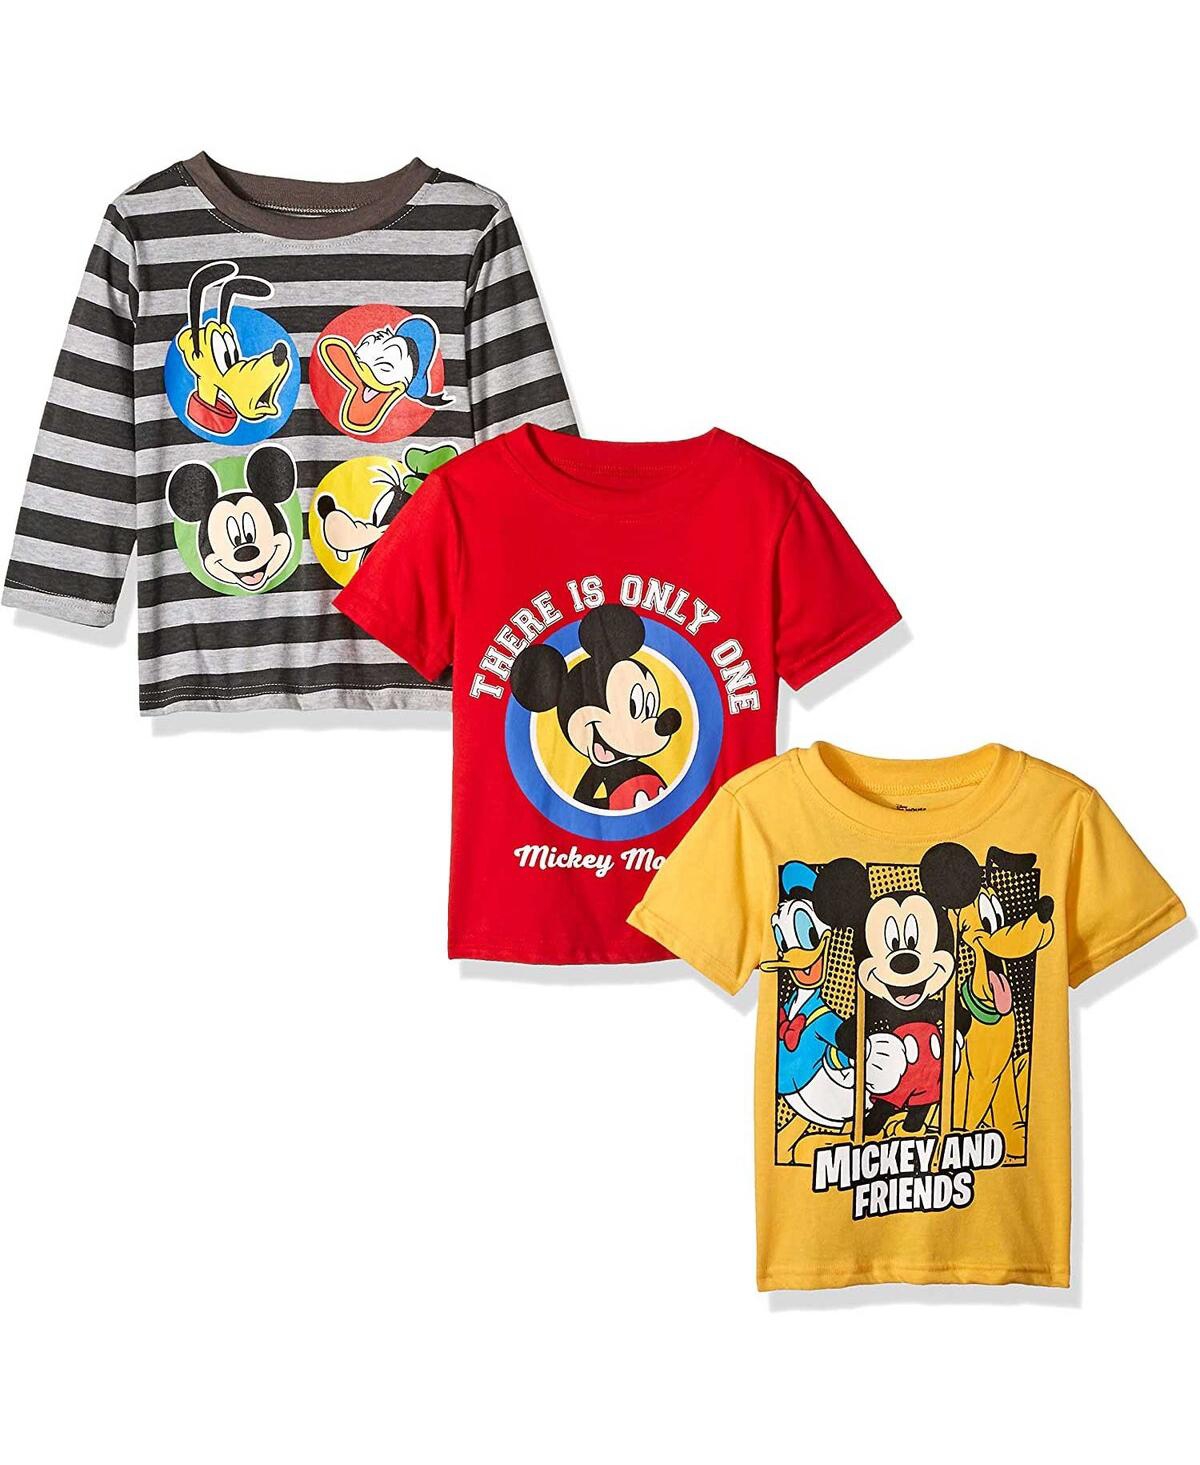 Shop Children's Apparel Network Toddler Red/yellow/gray Mickey Friends 3-pack T-shirt Set In Red Yellow